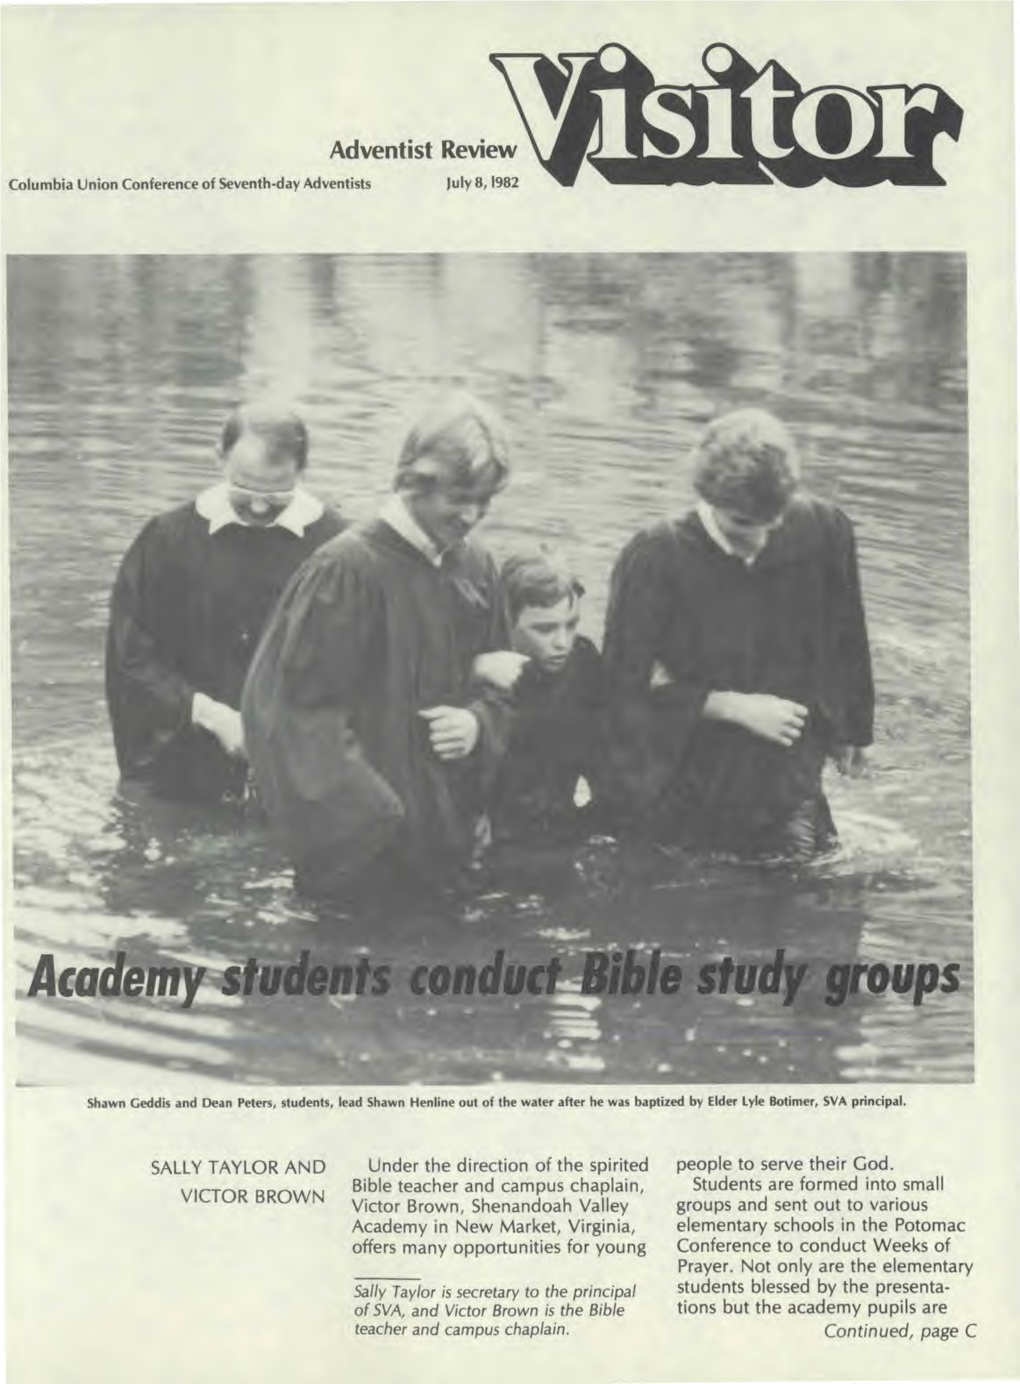 Adventist Review Isitor Columbia Union Conference of Seventh-Day Adventists� July 8,1982